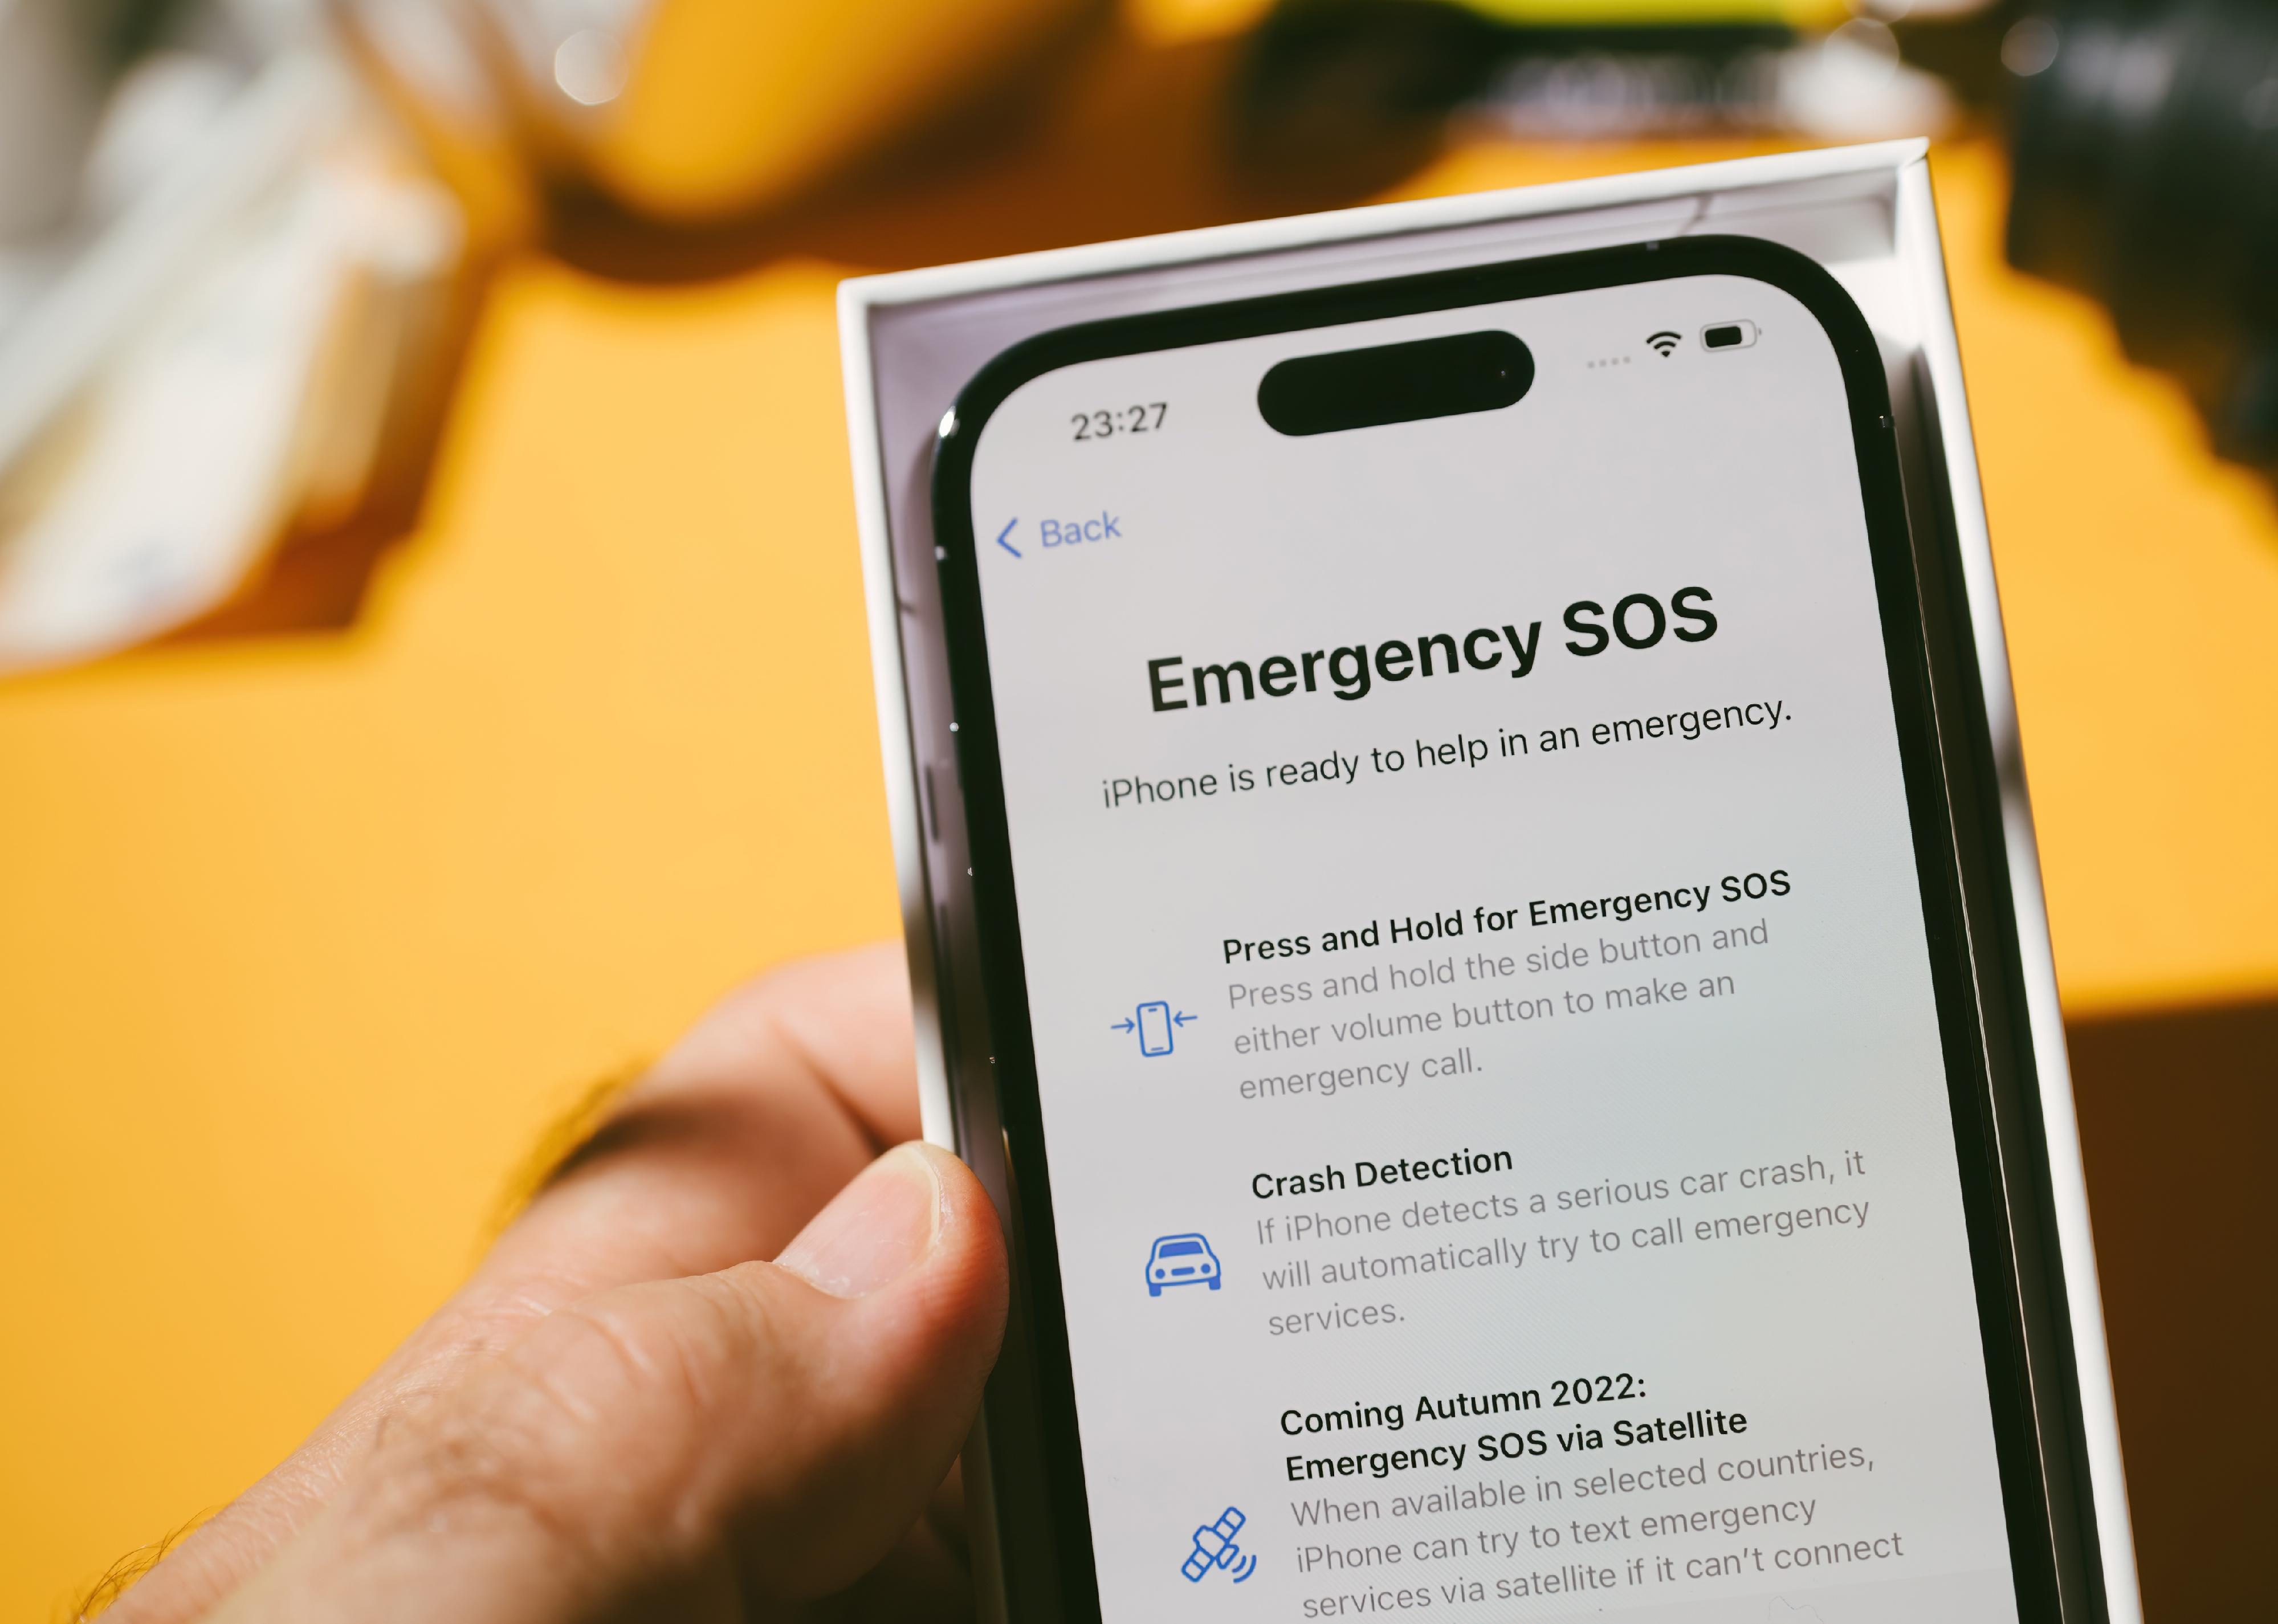 Person's hand holding iPhone with Emergency SOS menu.